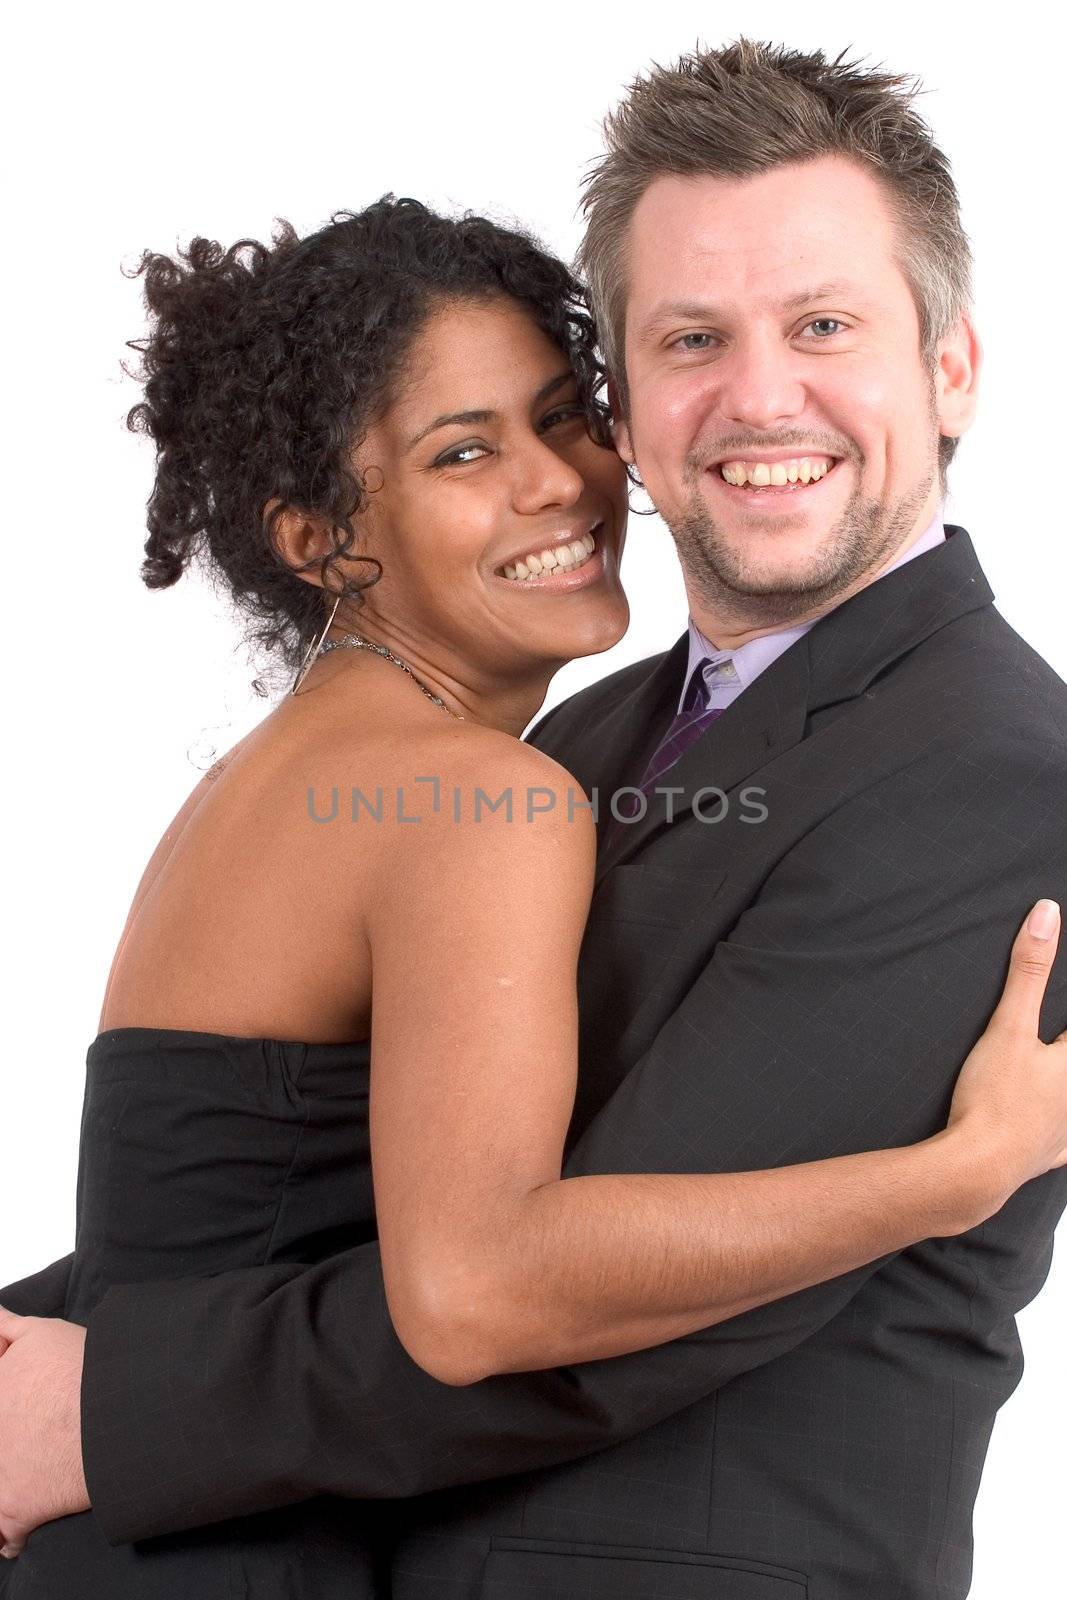 Lovely diverse couple by Fotosmurf